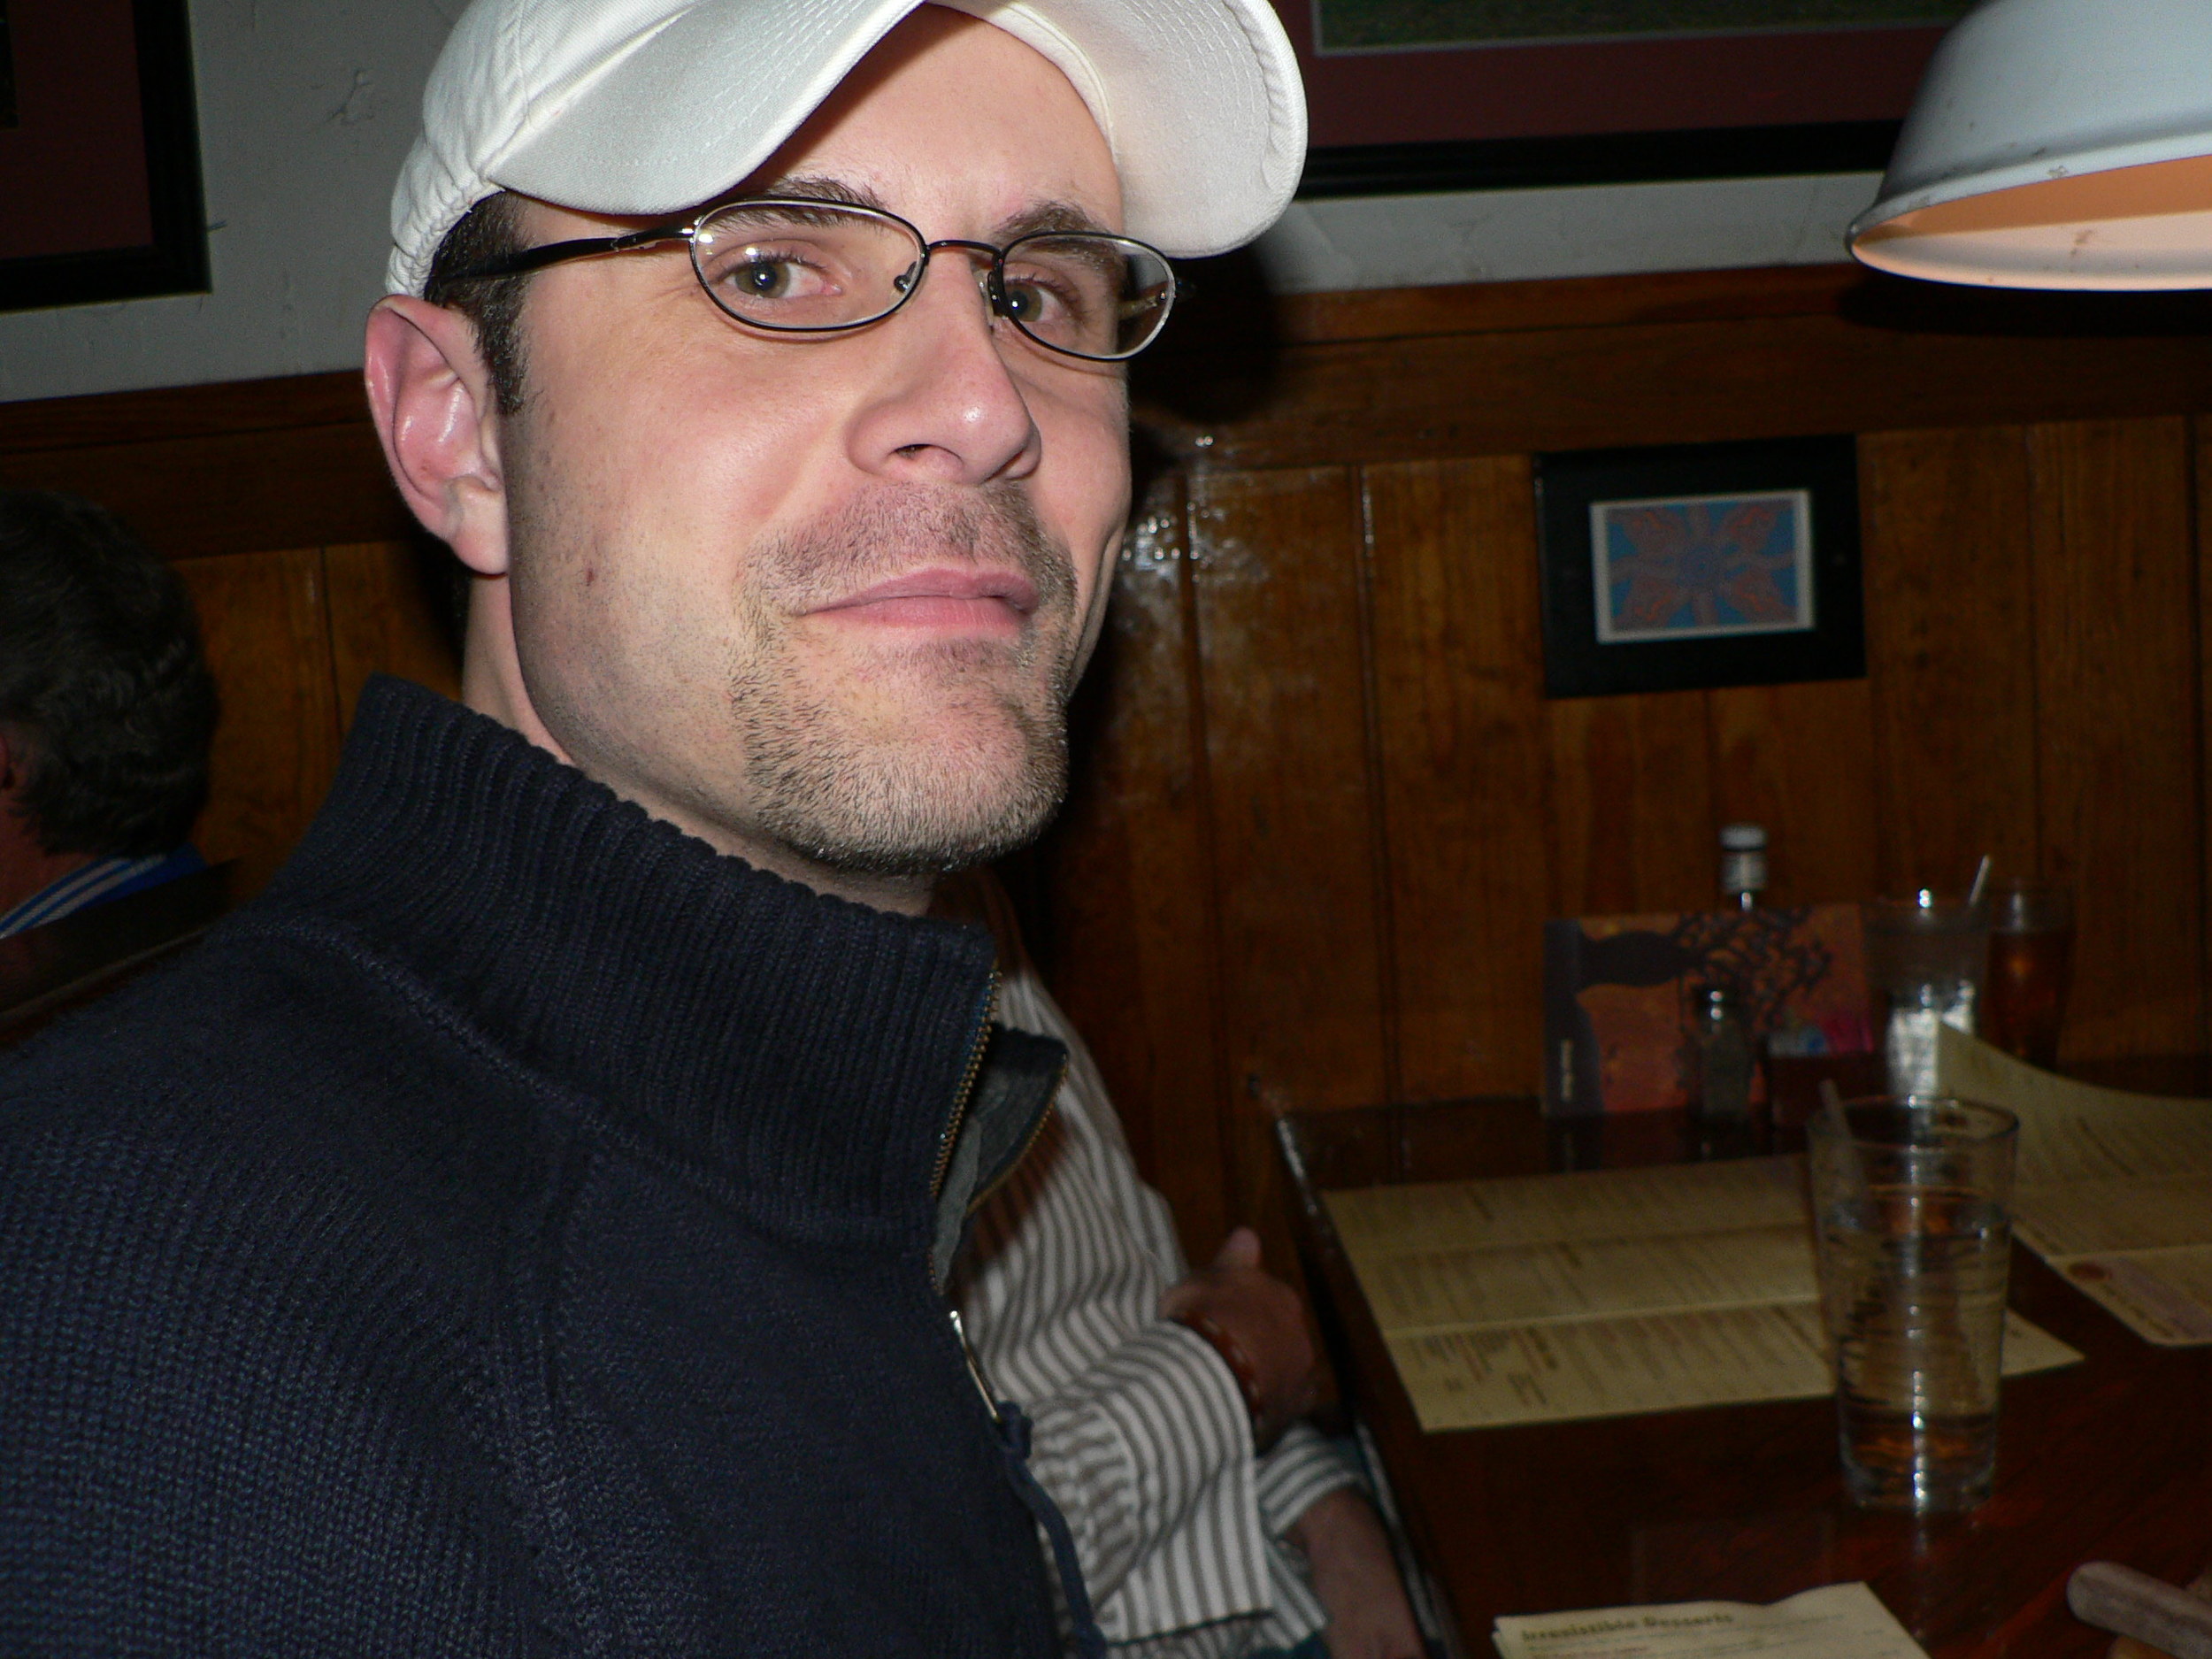 Davin at my 29th Birthday dinner. He was not expecting the sudden Papparazi style camera action!